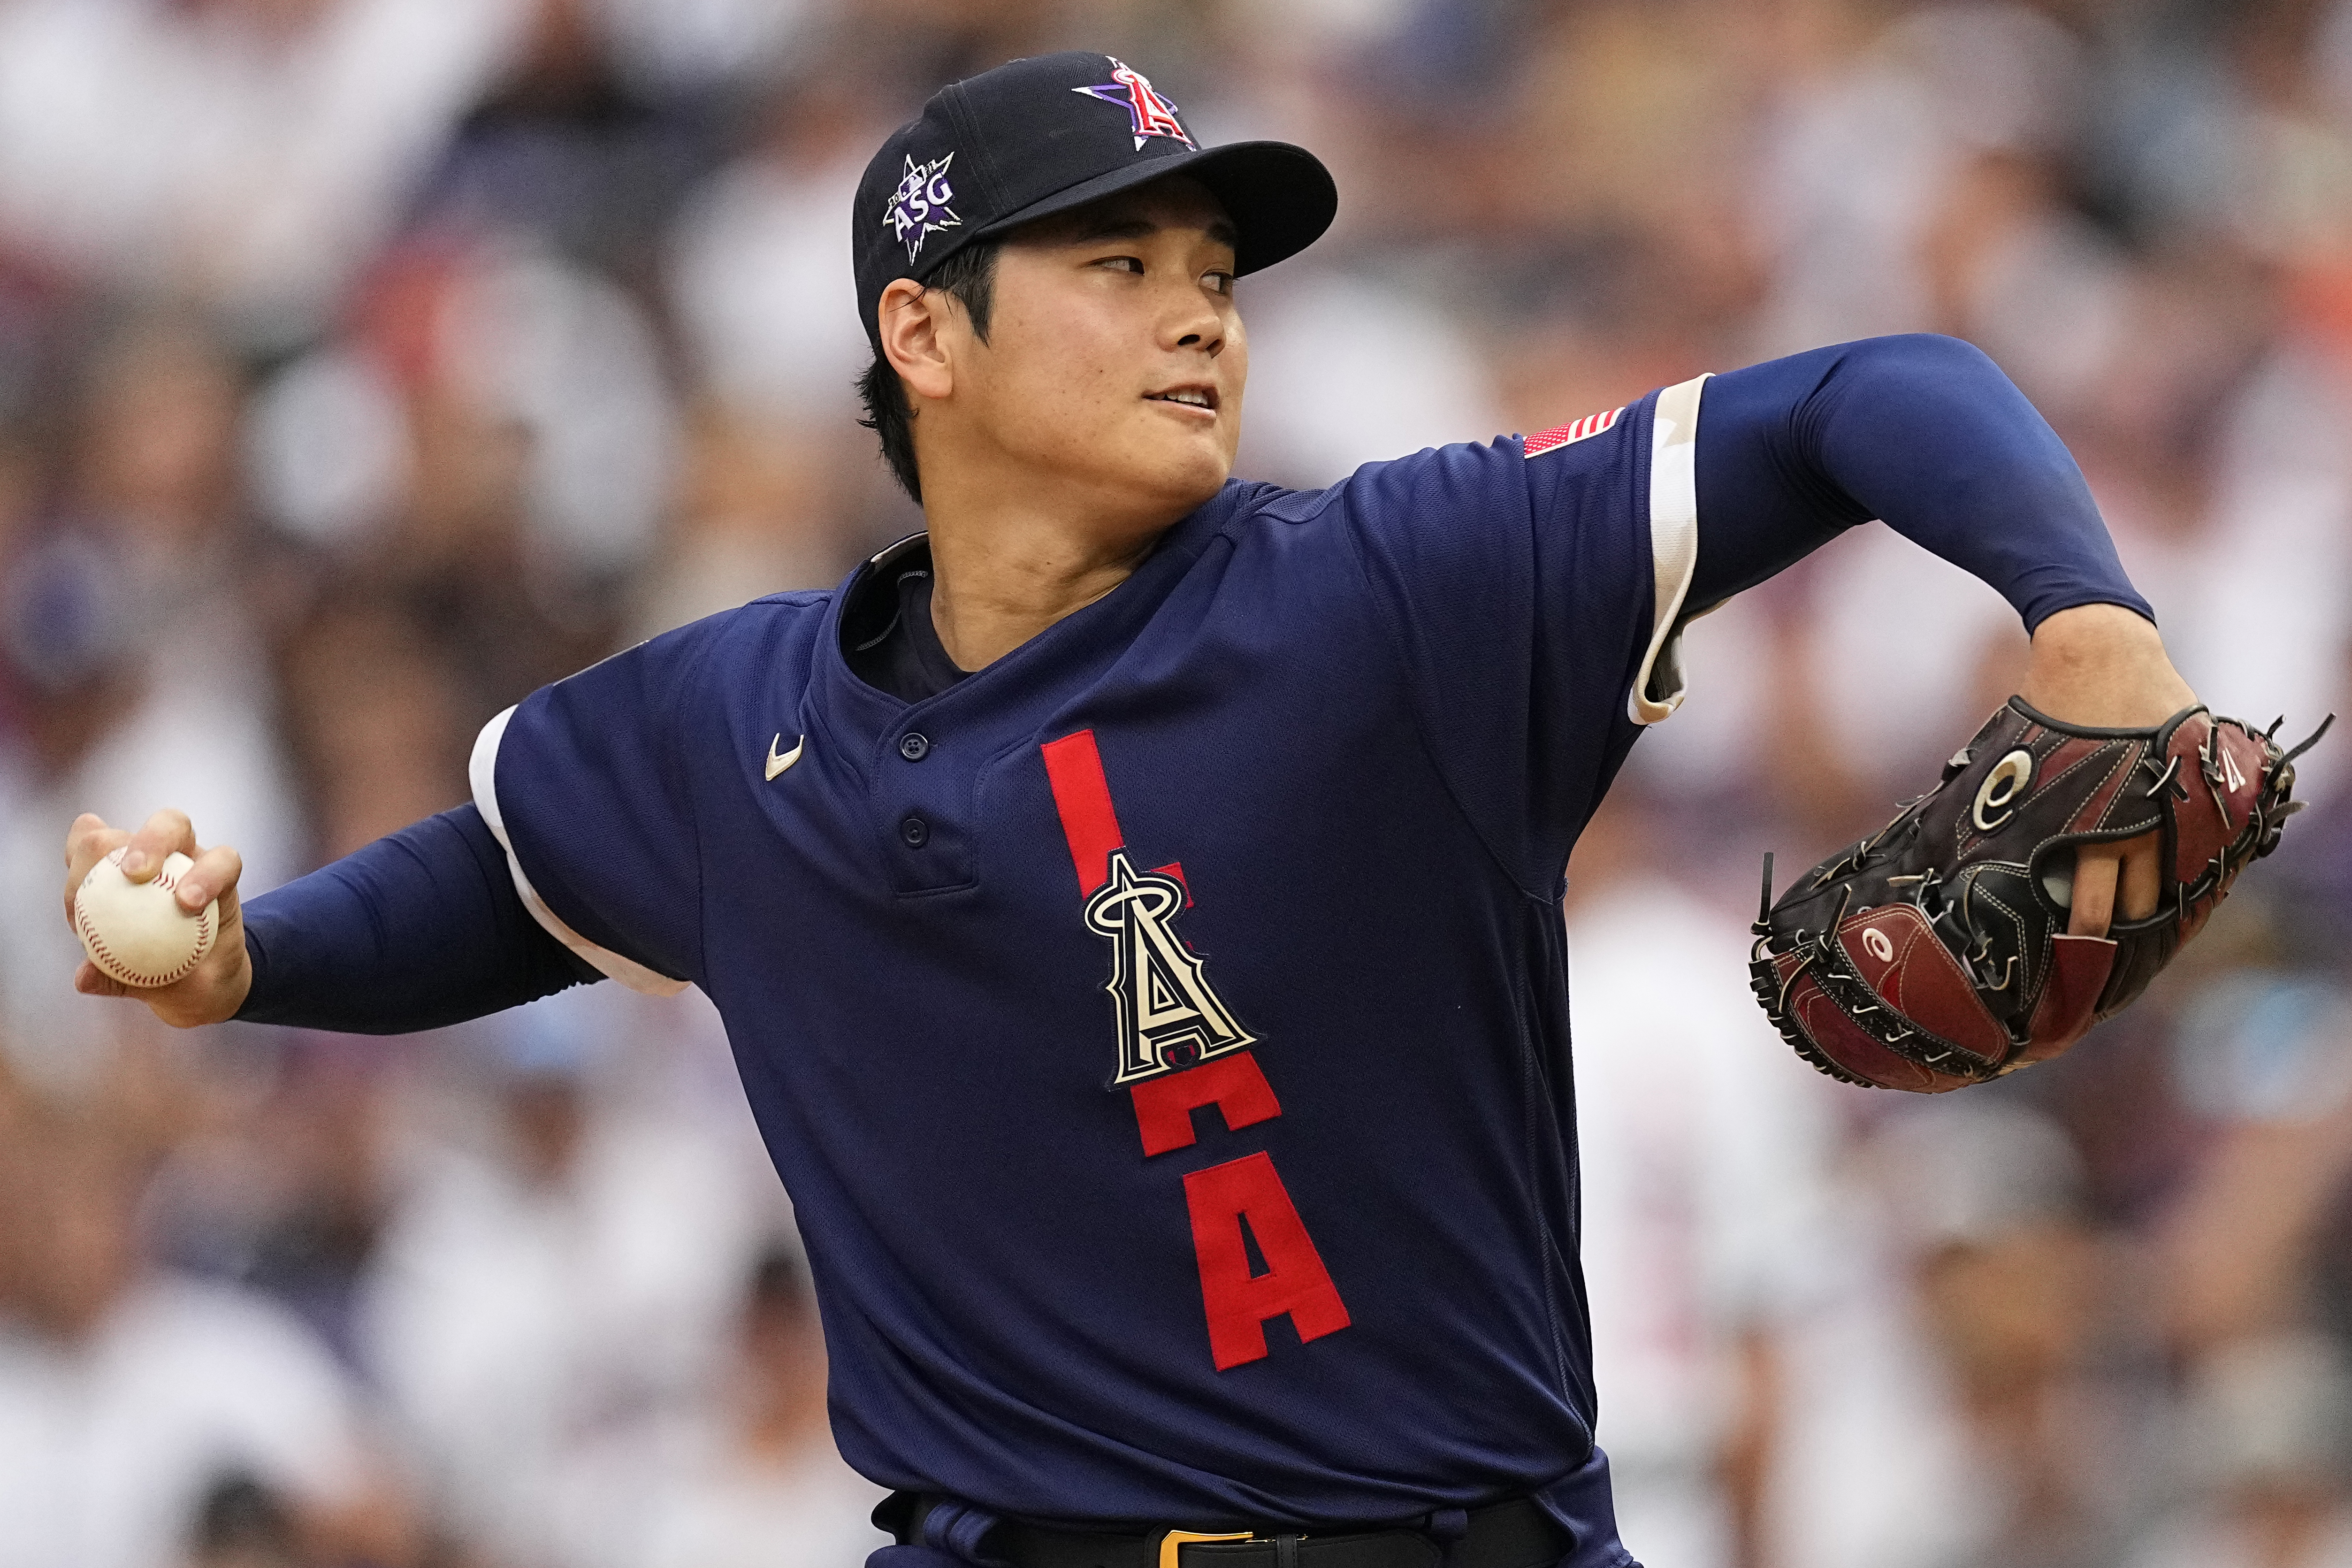 Shohei Ohtani gives a glimpse of his power at the plate & over the